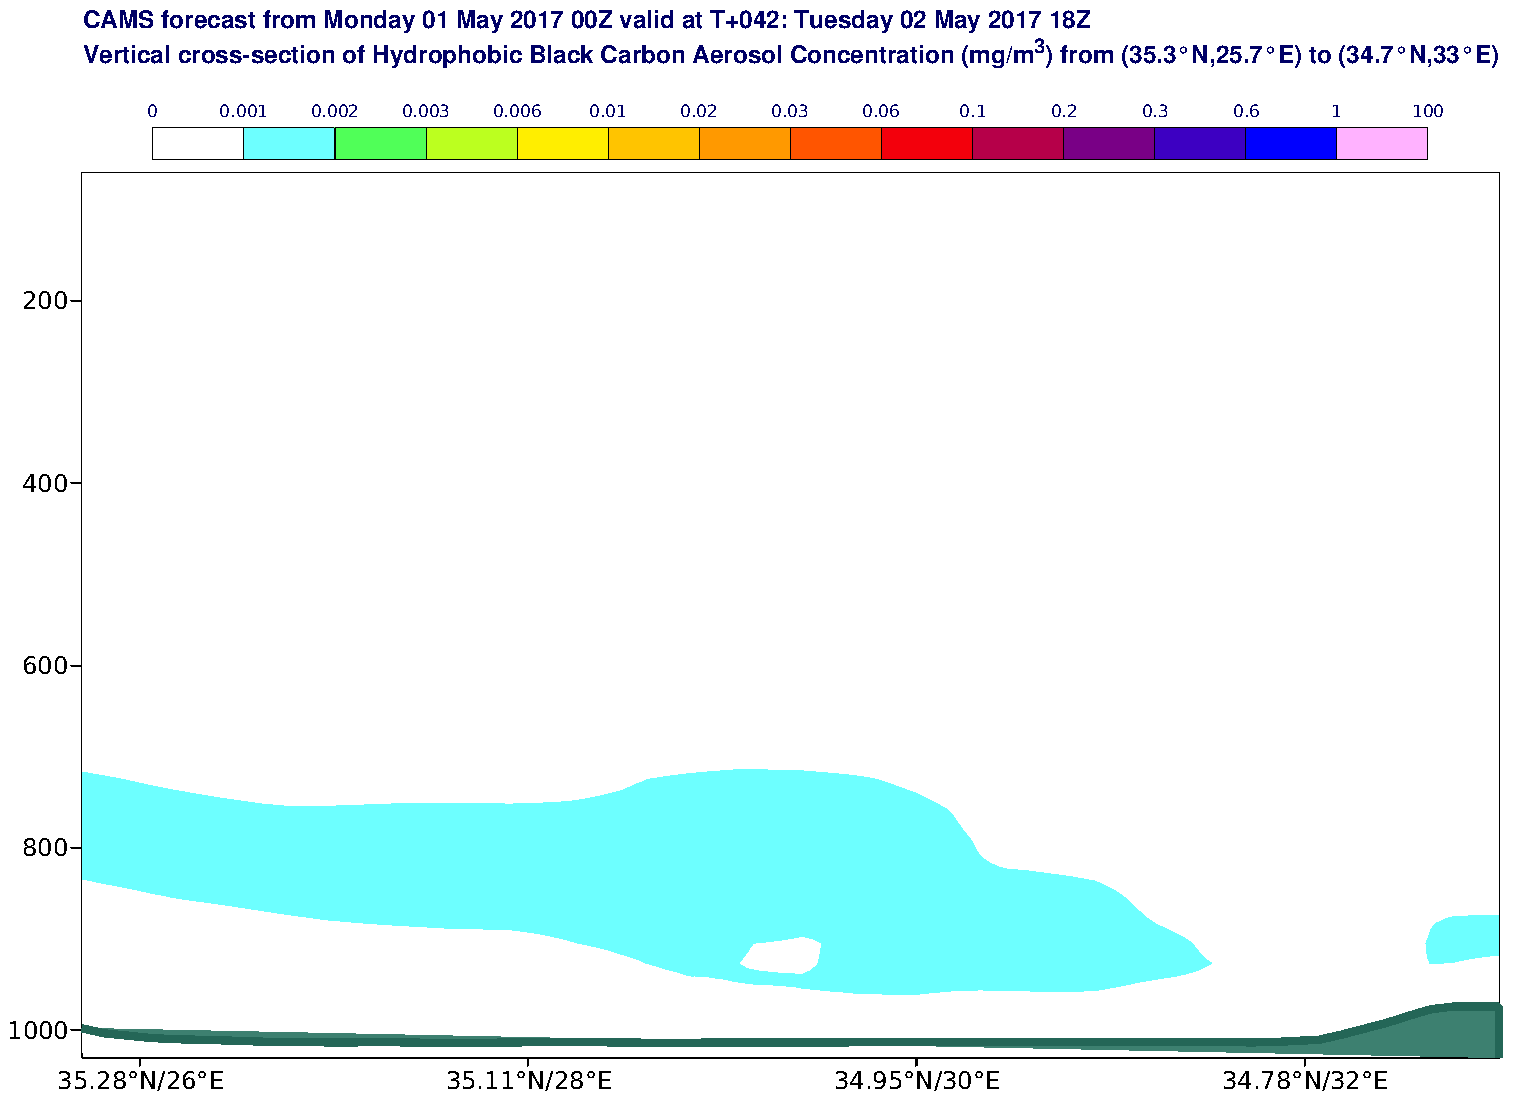 Vertical cross-section of Hydrophobic Black Carbon Aerosol Concentration (mg/m3) valid at T42 - 2017-05-02 18:00